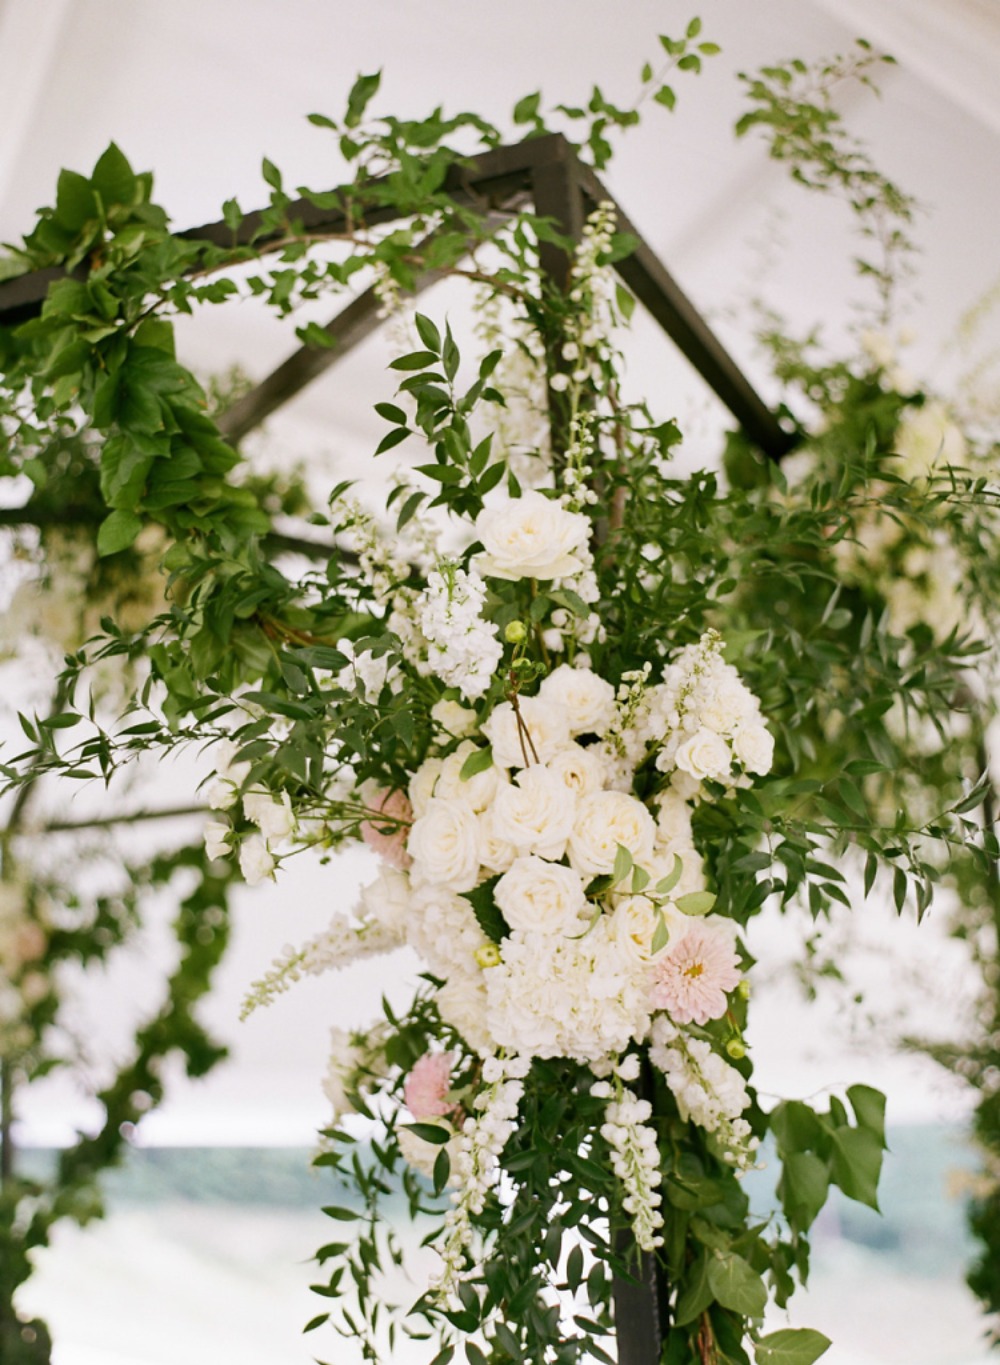 floral covered wedding arch